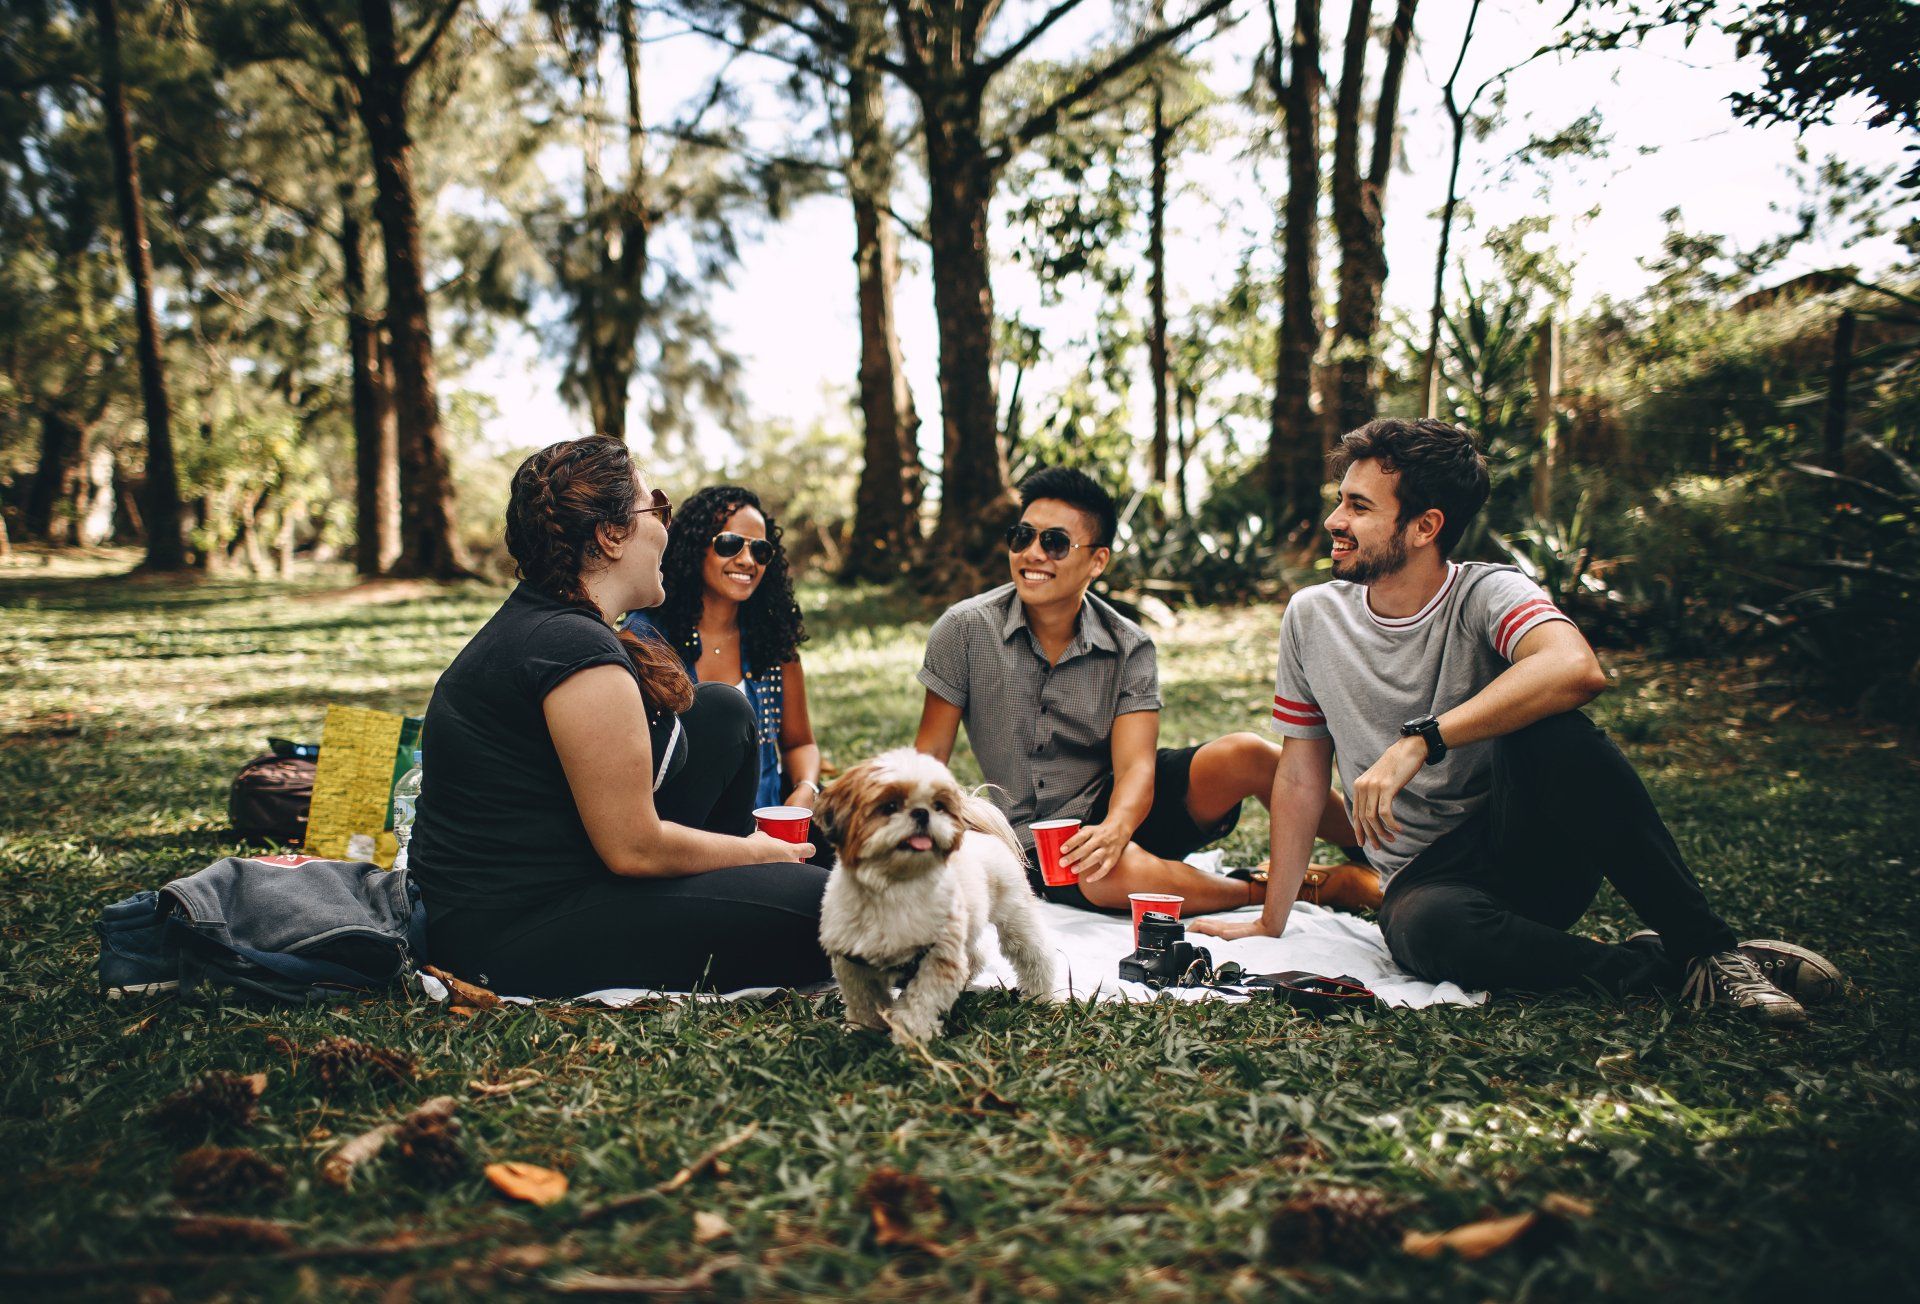 a group of people are having a picnic in the park with a dog .